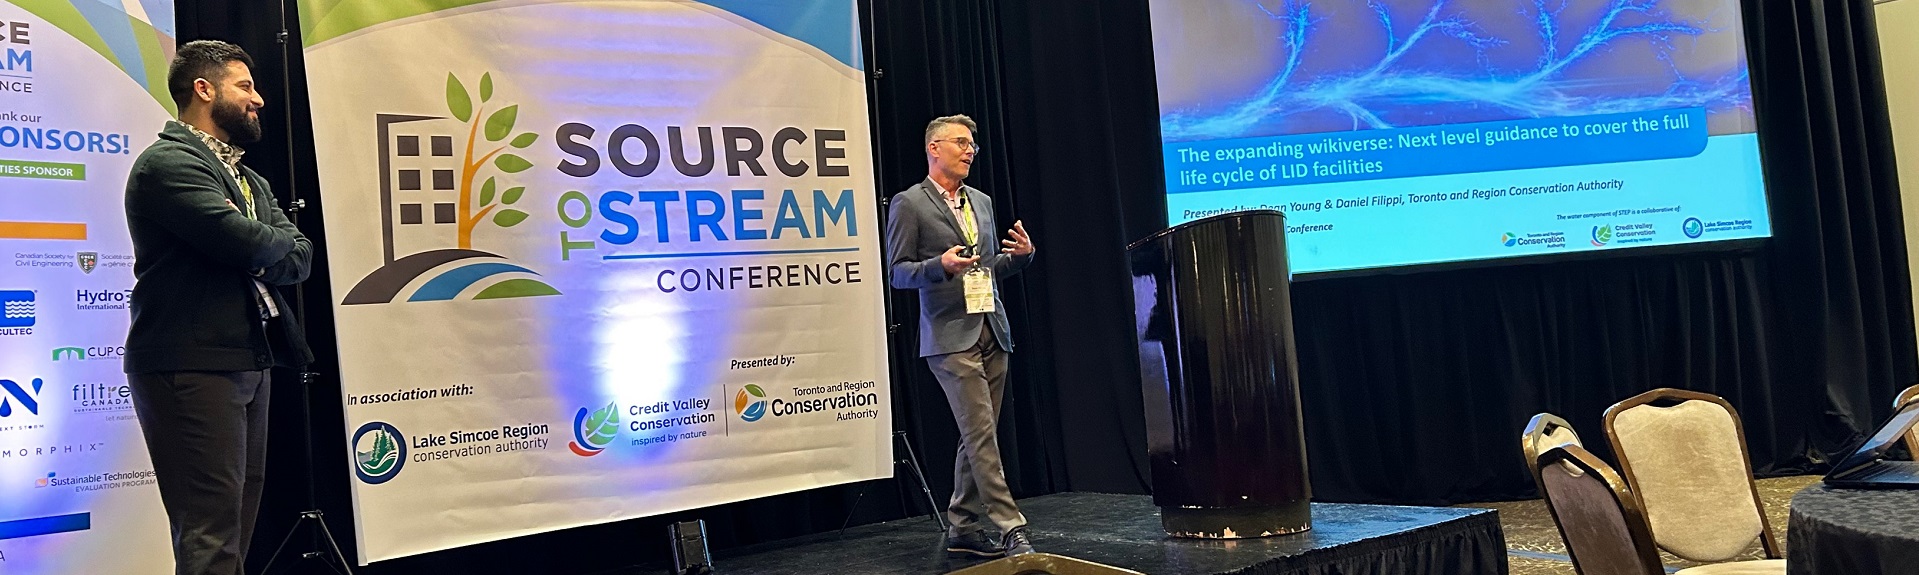 presenter leads panel discussion at Source to Stream conference